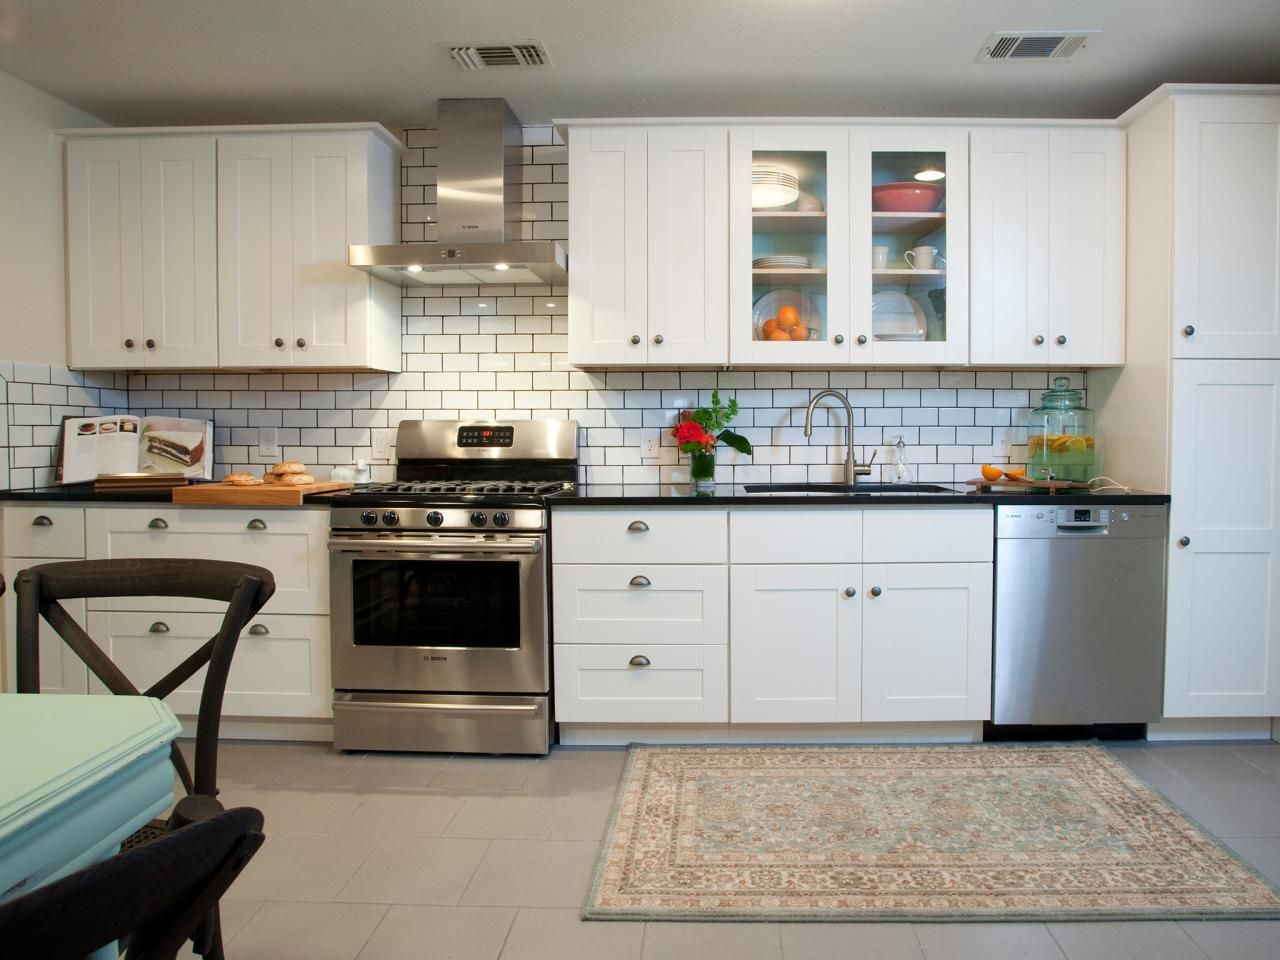 White Tile Flooring Kitchen
 Dress Your Kitchen In Style With Some White Subway Tiles